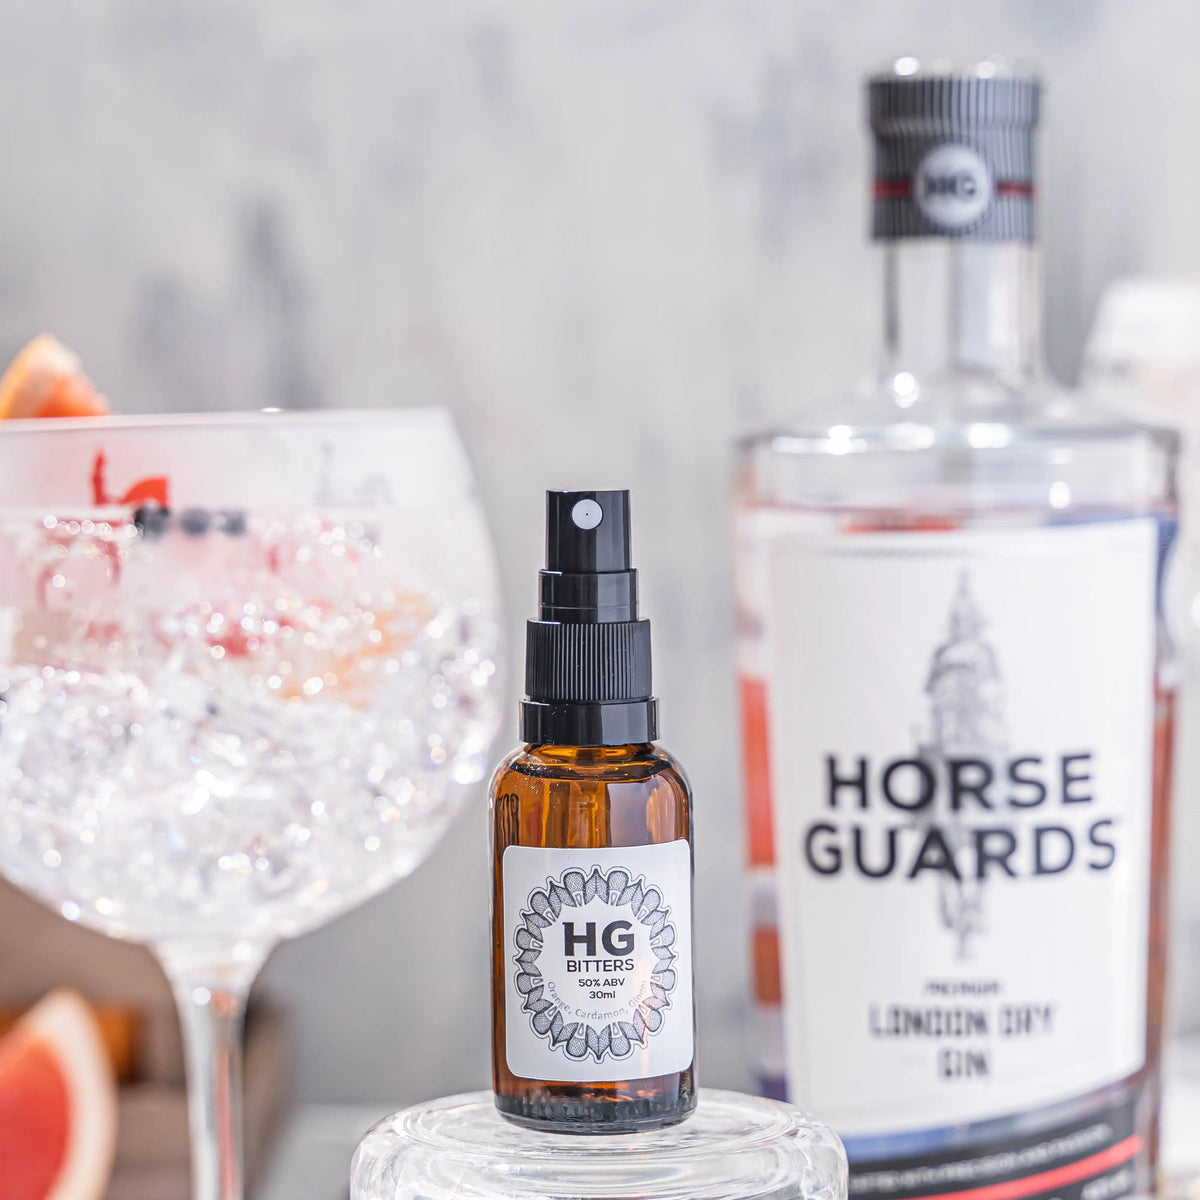 London Dry Gin and Horse Guards Bitters